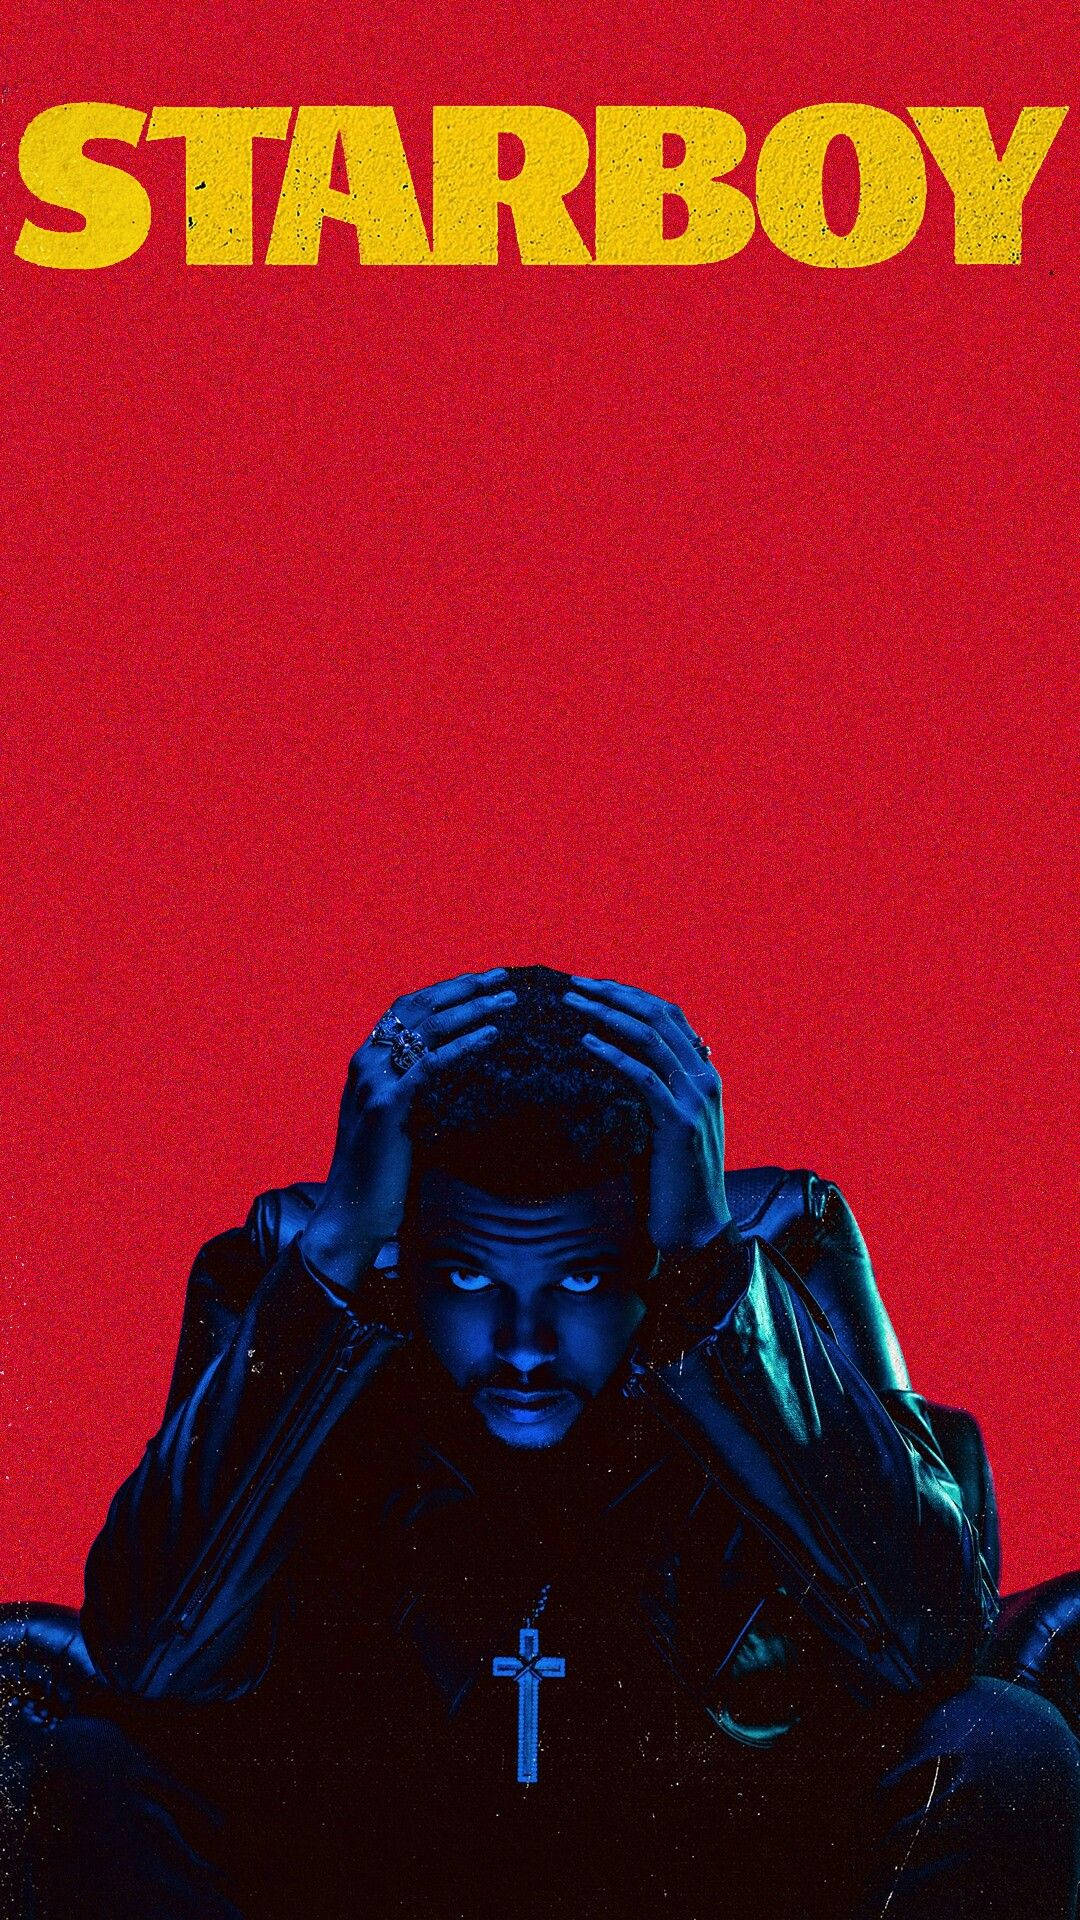 Star boy the weekend. Starboy the Weeknd обложка. The Weeknd Starboy album Cover. Star boy the Weeknd. Starboy обложка альбома.